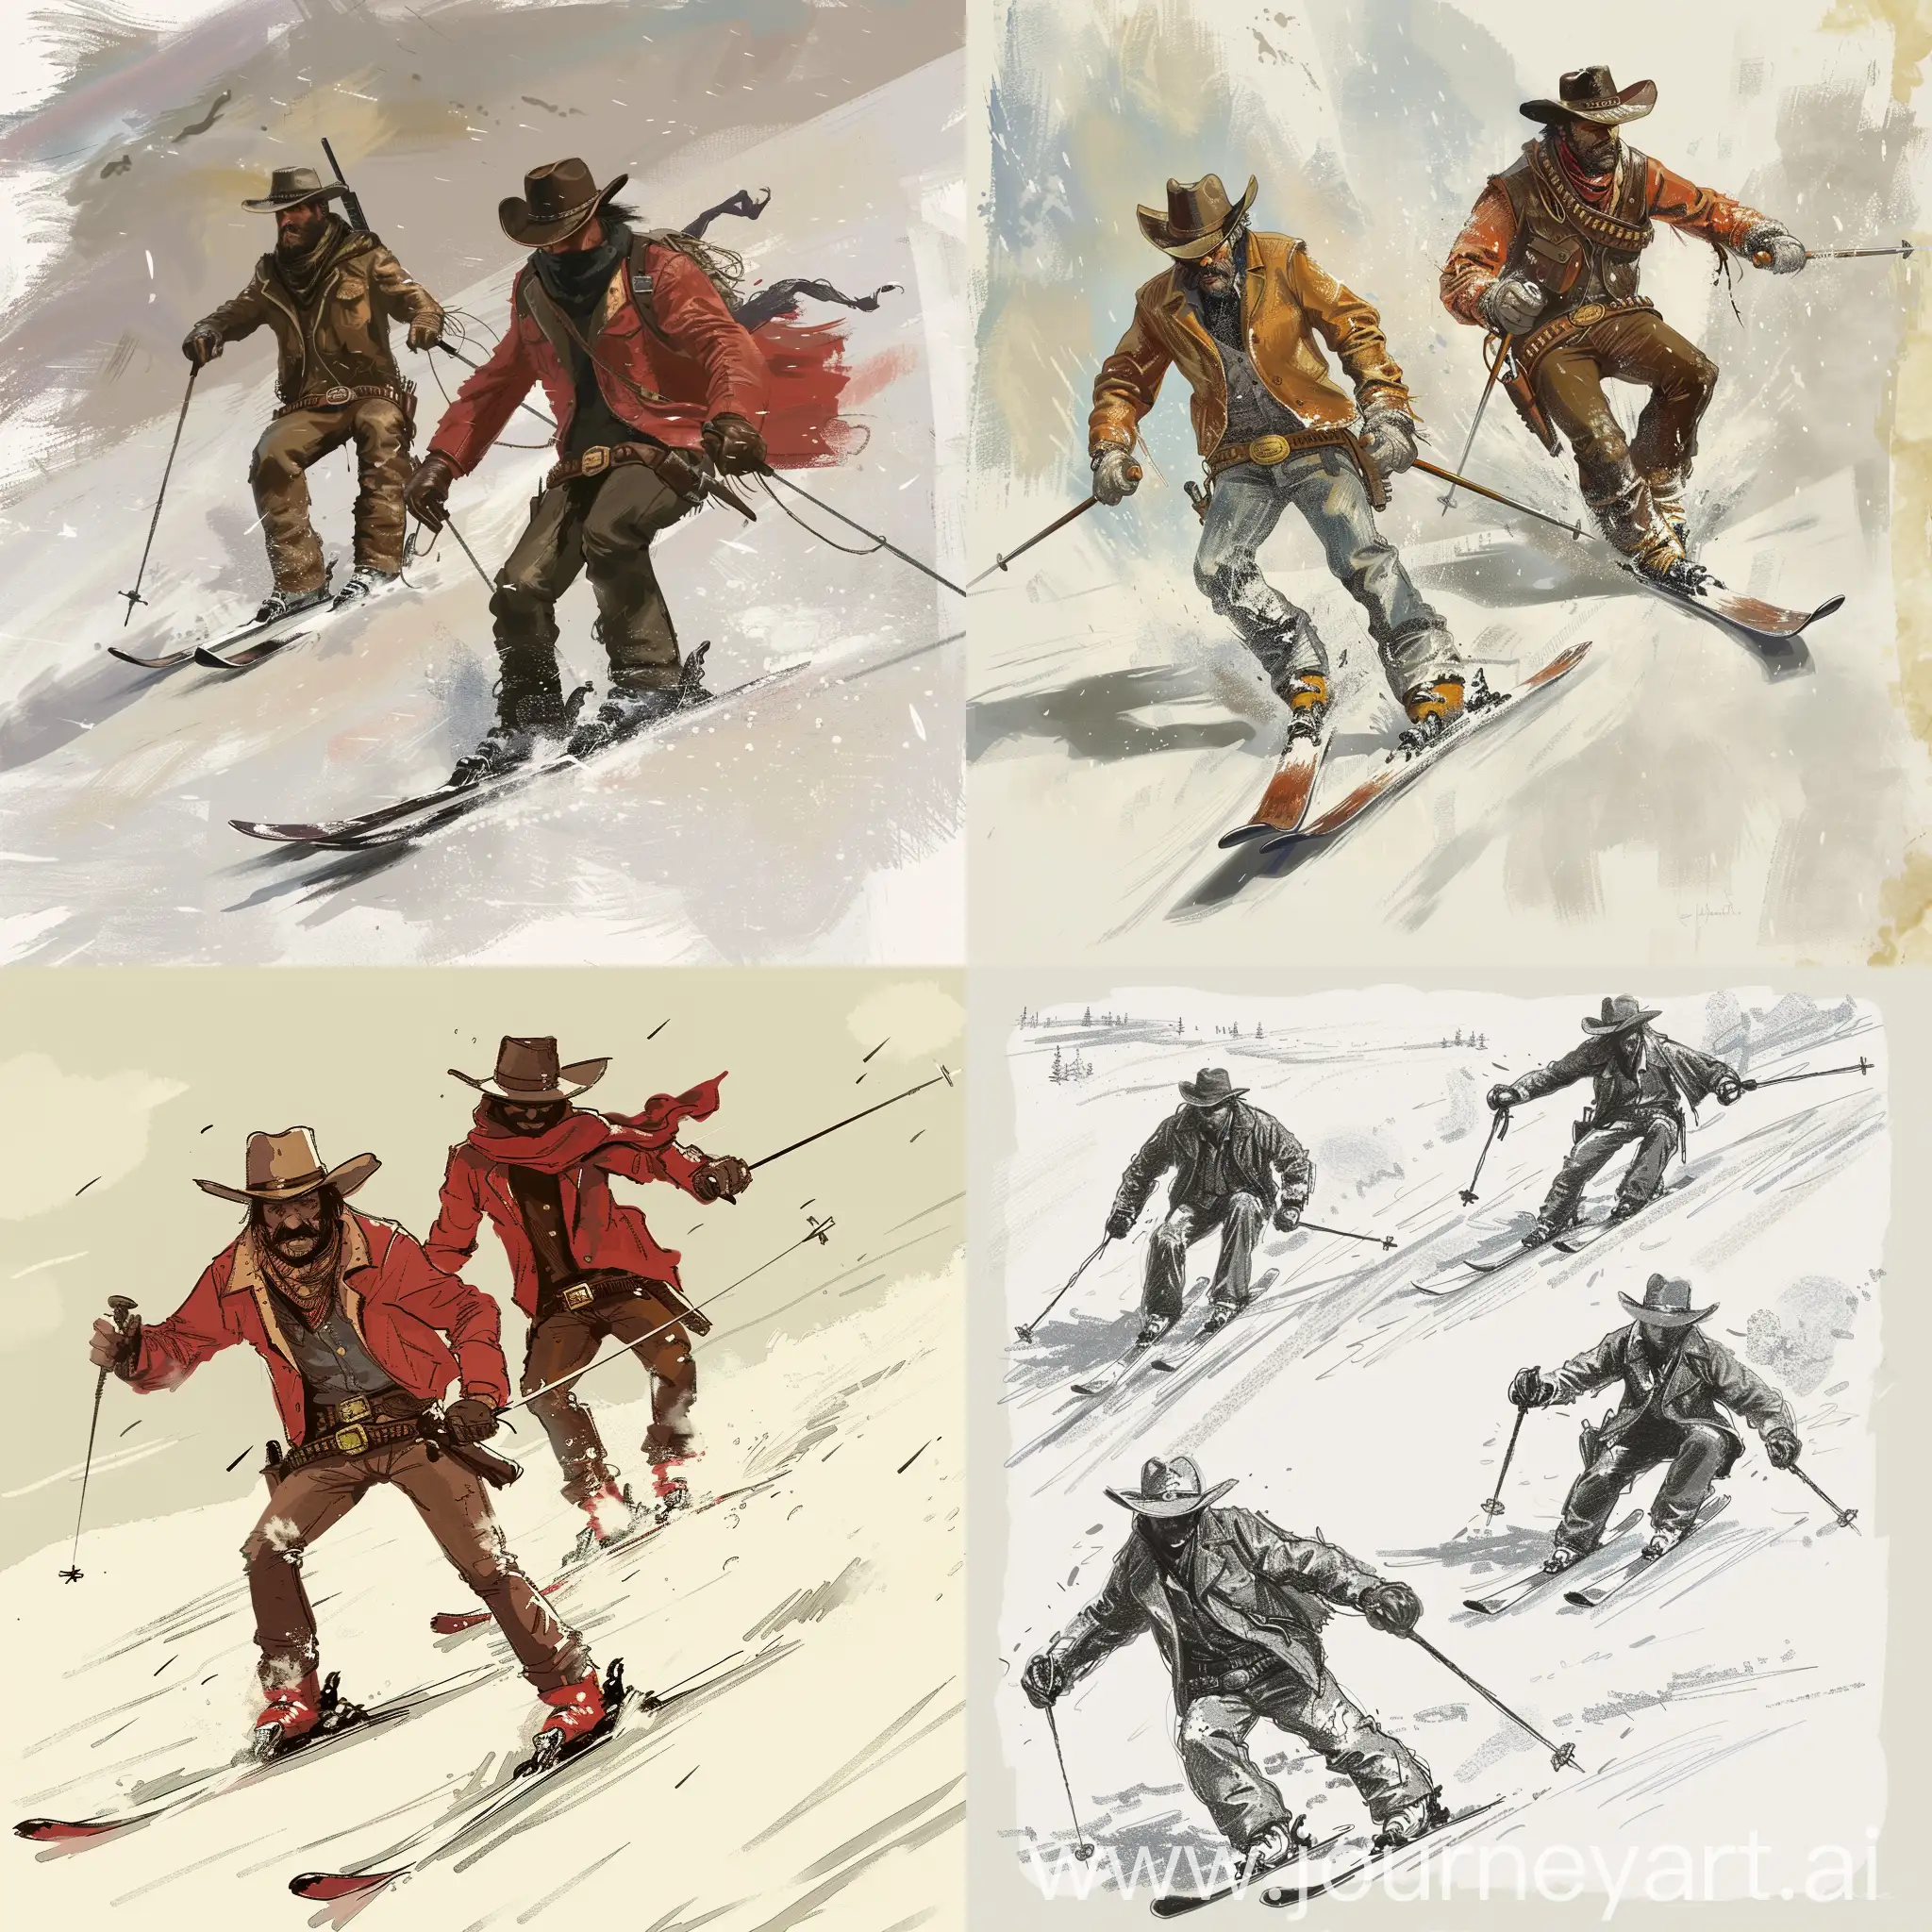 Rugged-Cowboys-Skiing-in-Wild-West-Adventure